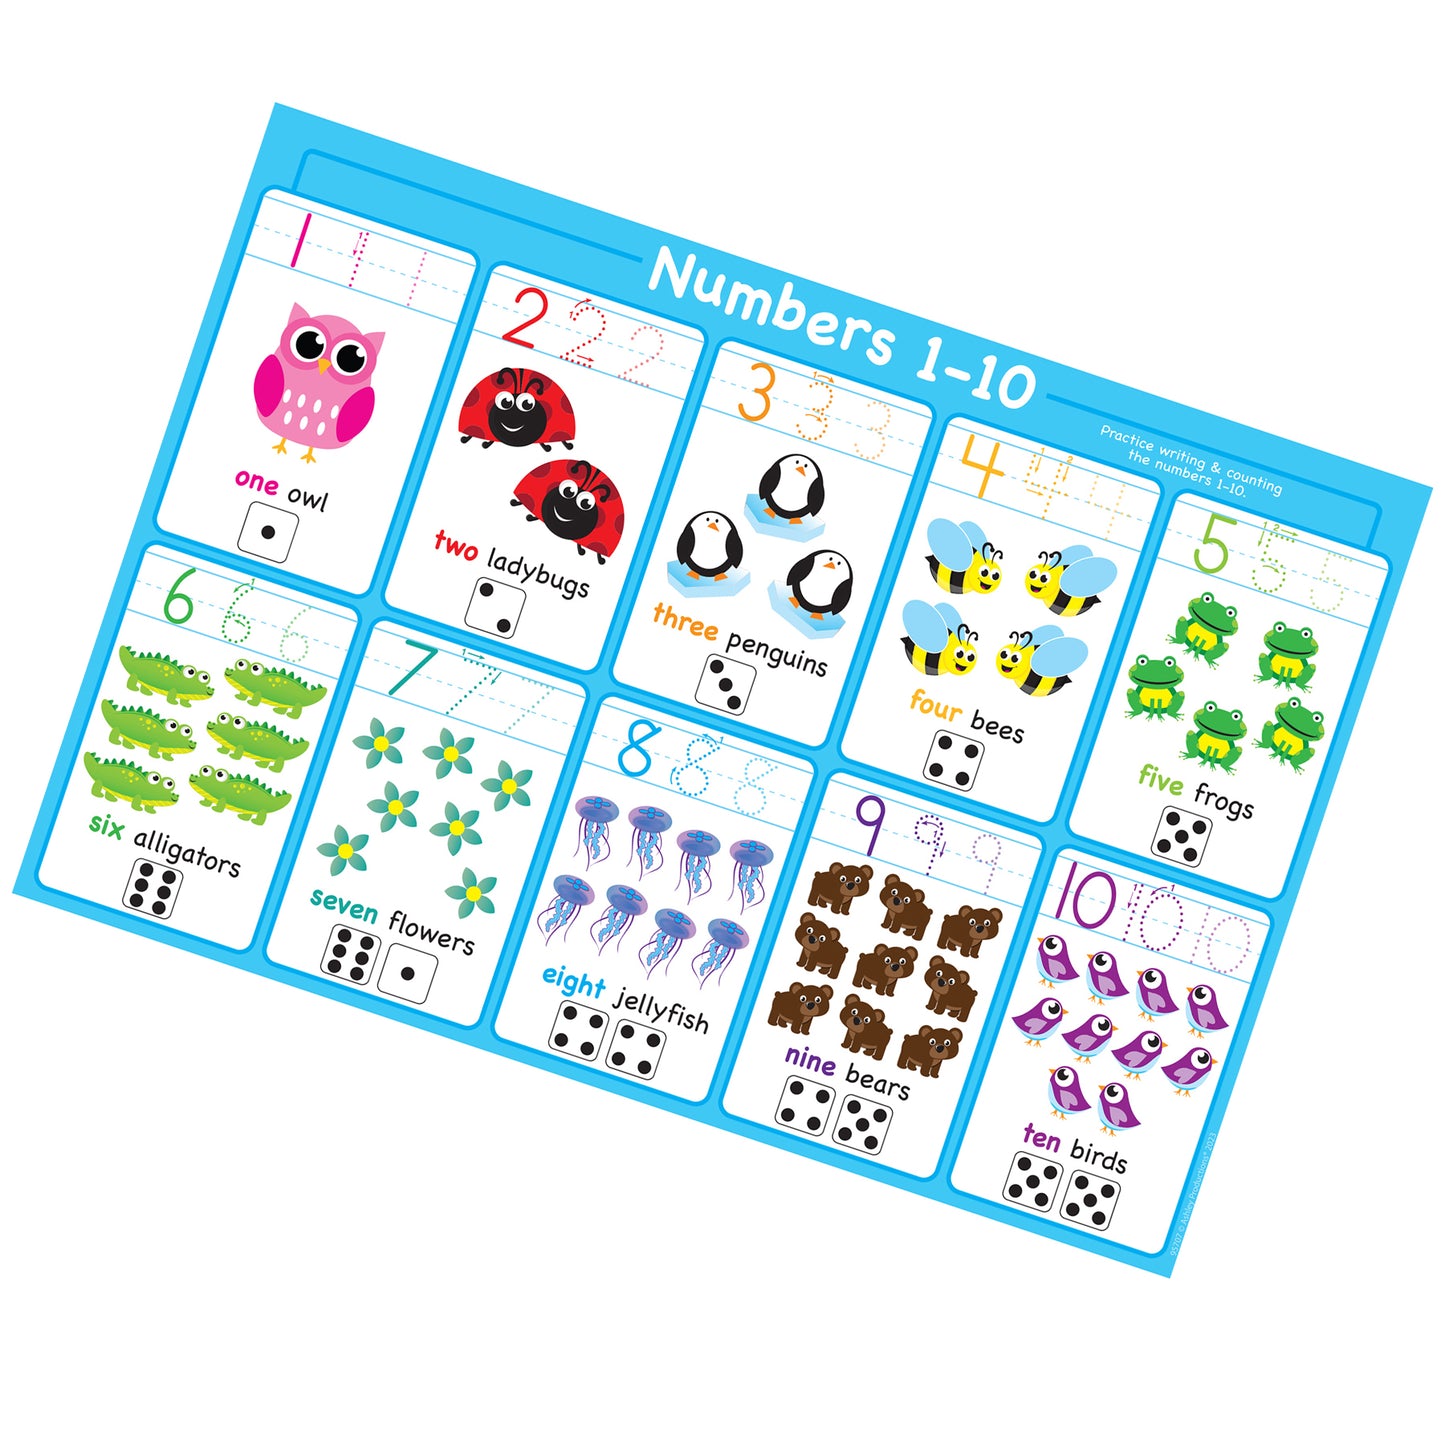 Placemat Studio™ Smart Poly® 1-10 Numbers Learning Placemat, 13" x 19", Single Sided, Pack of 10